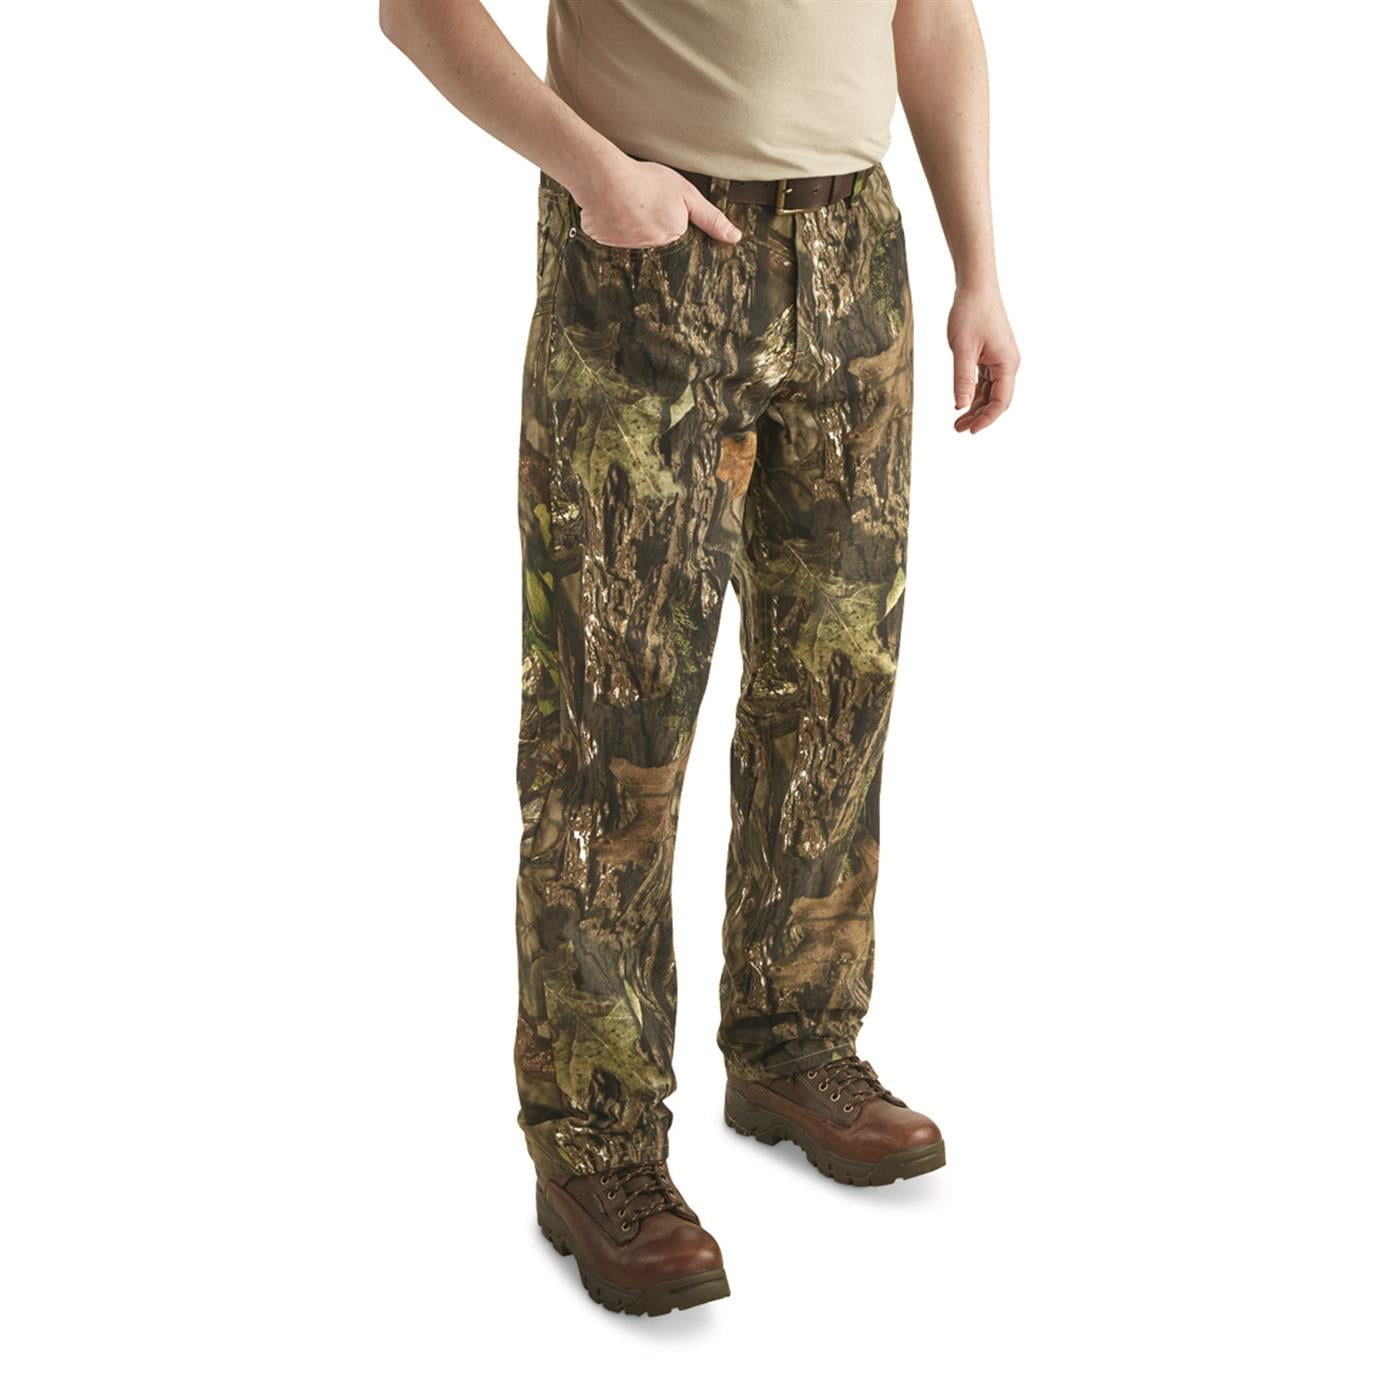 Guide Gear Mens Cotton Camo Pants, Camouflage Jeans Relaxed Fit for ...